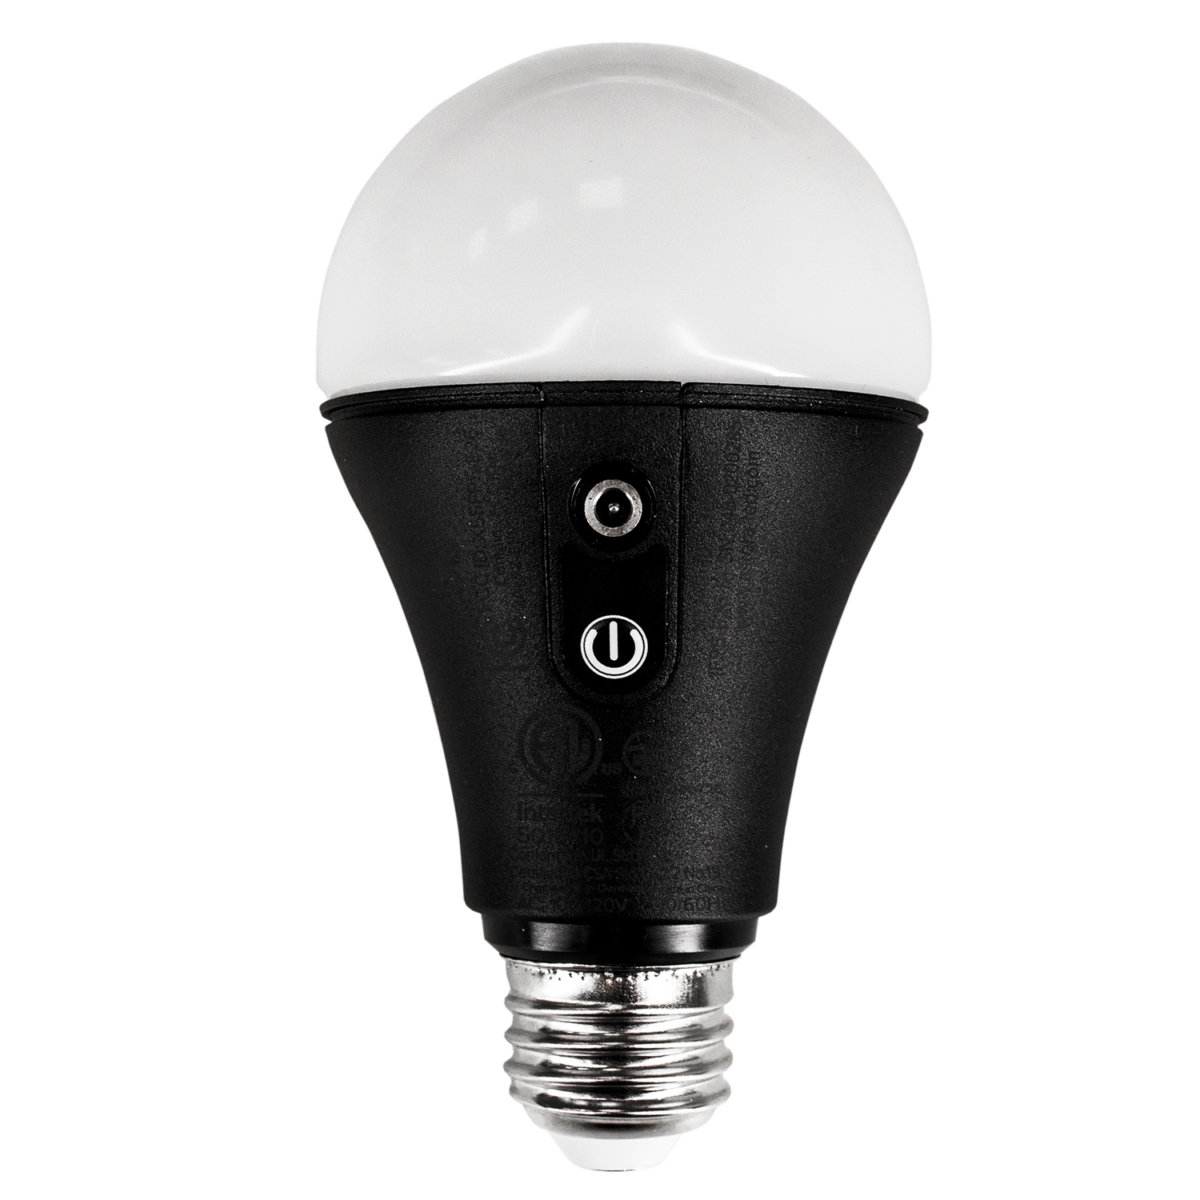 DMX controlled LED bulb by Astera